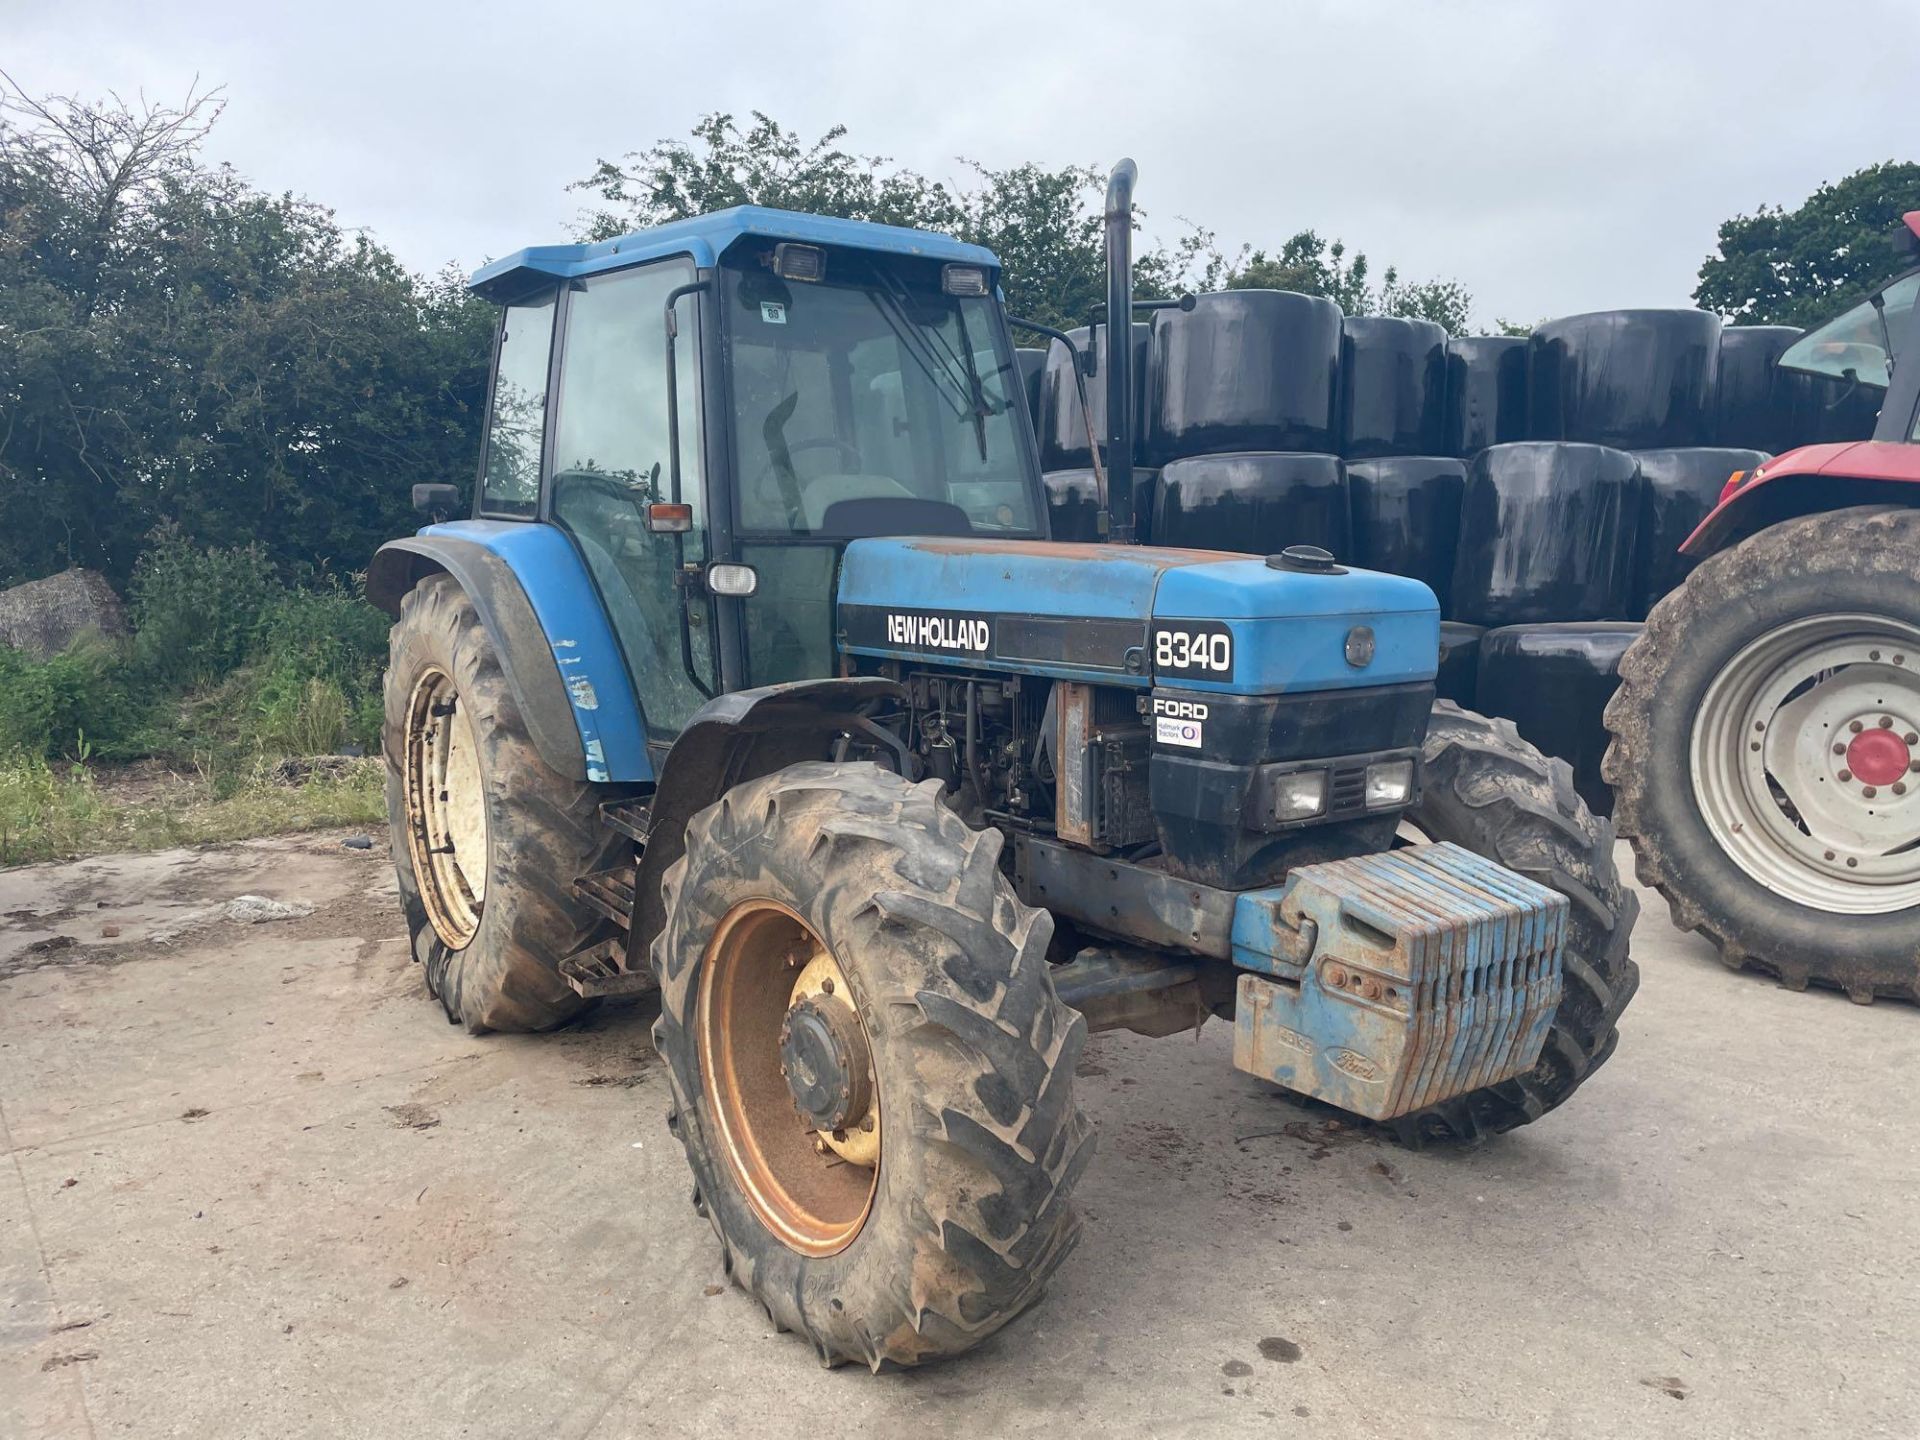 1997 New Holland 8340 4wd tractor with 2 manual spools on 14.9R28 front and 18.4R38 rear wheels and